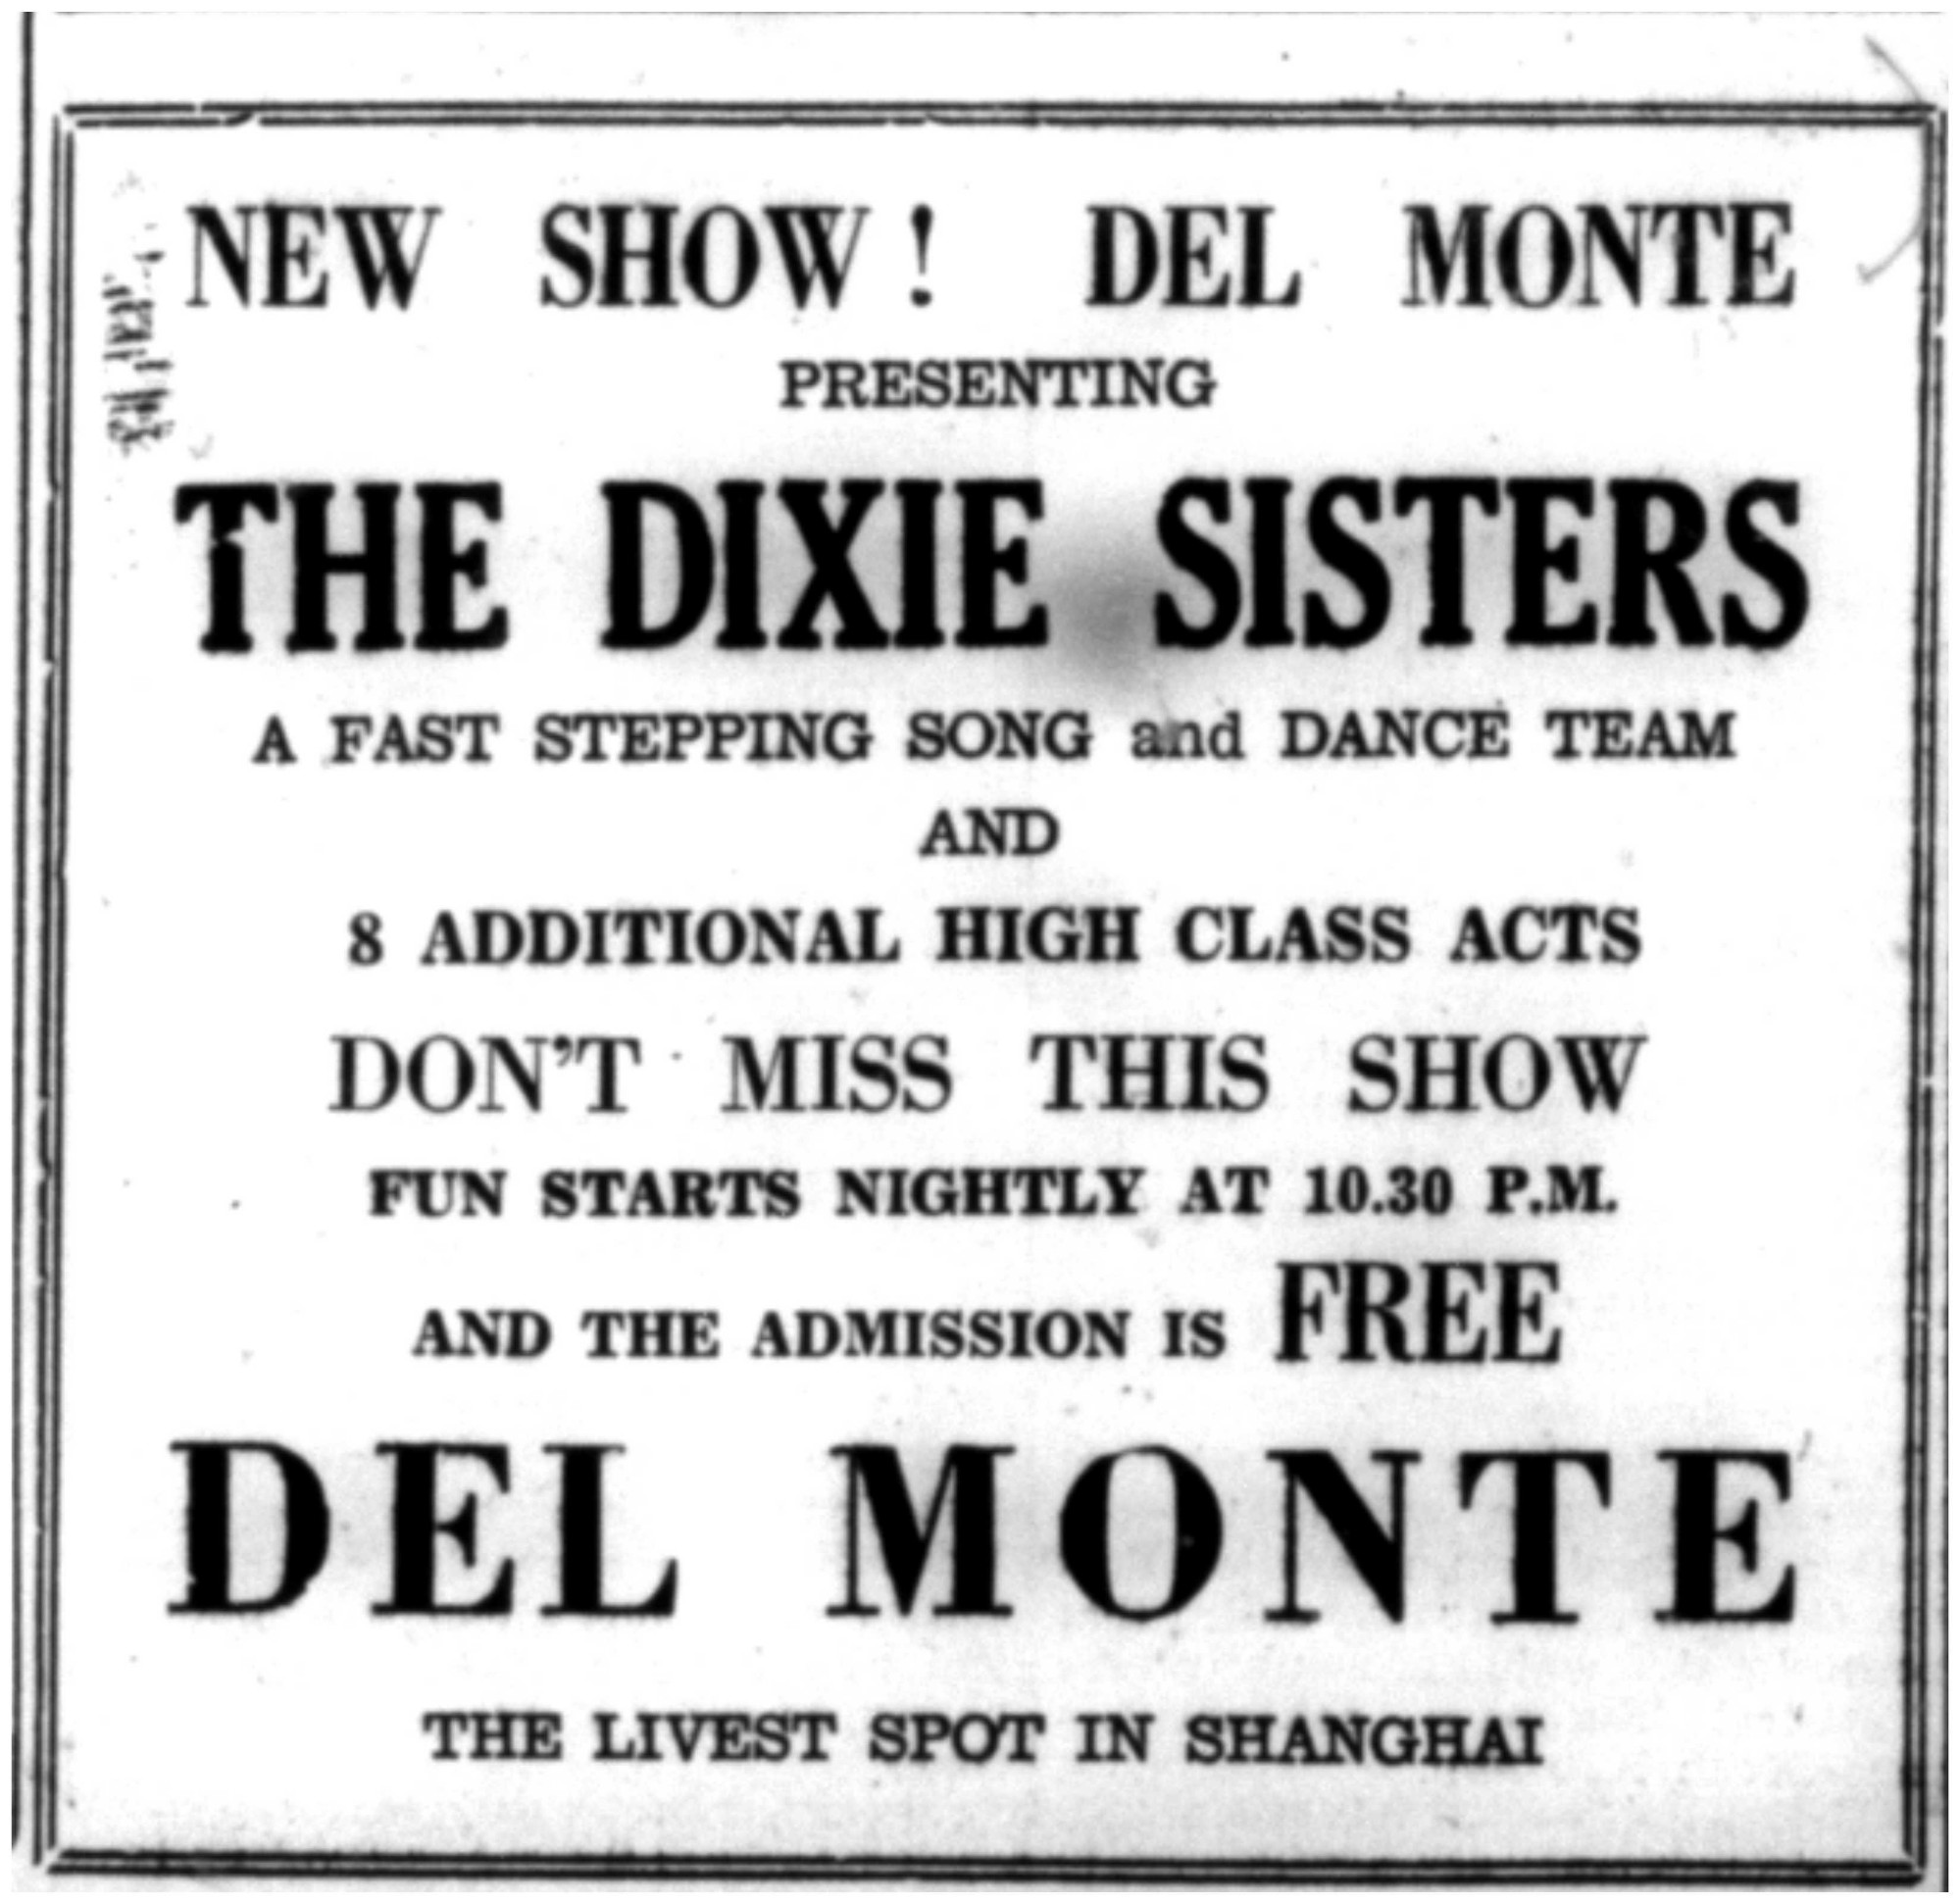 The-Dixie-Sisters-at-the-Del-Monte.jpg